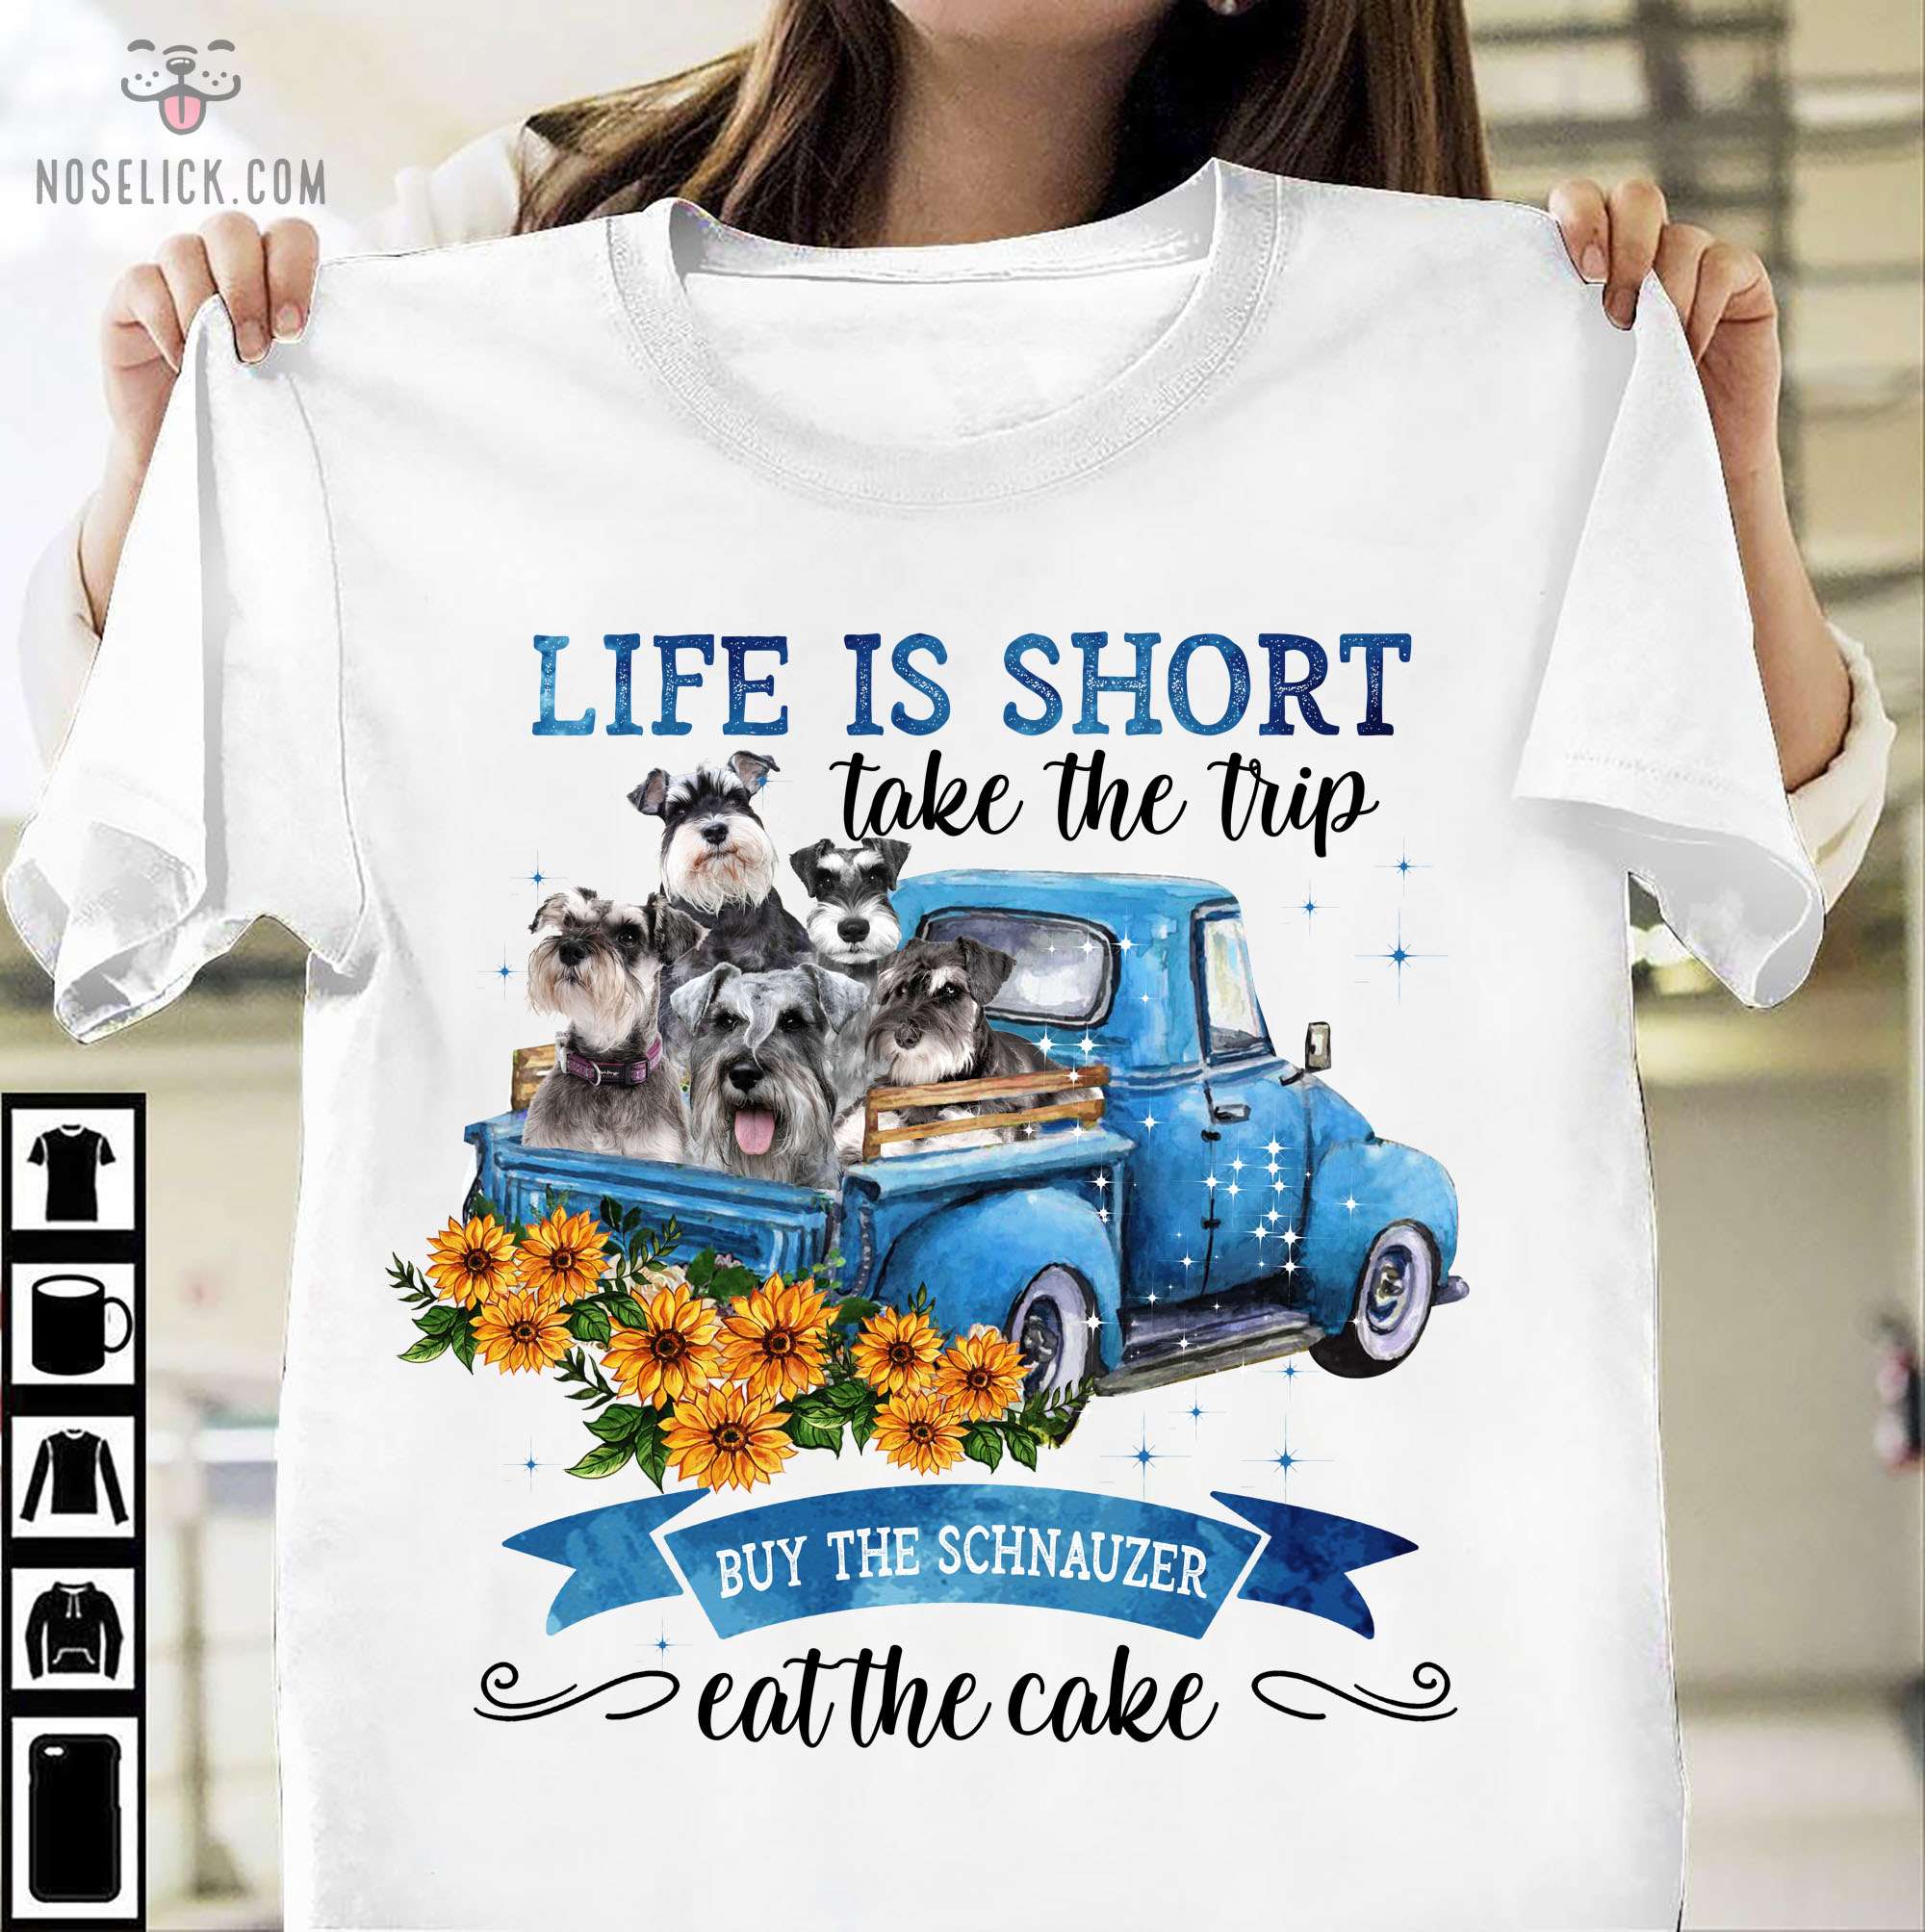 Life is short take the trip buy the Schnauzer eat the cake - Schnauzer on truck